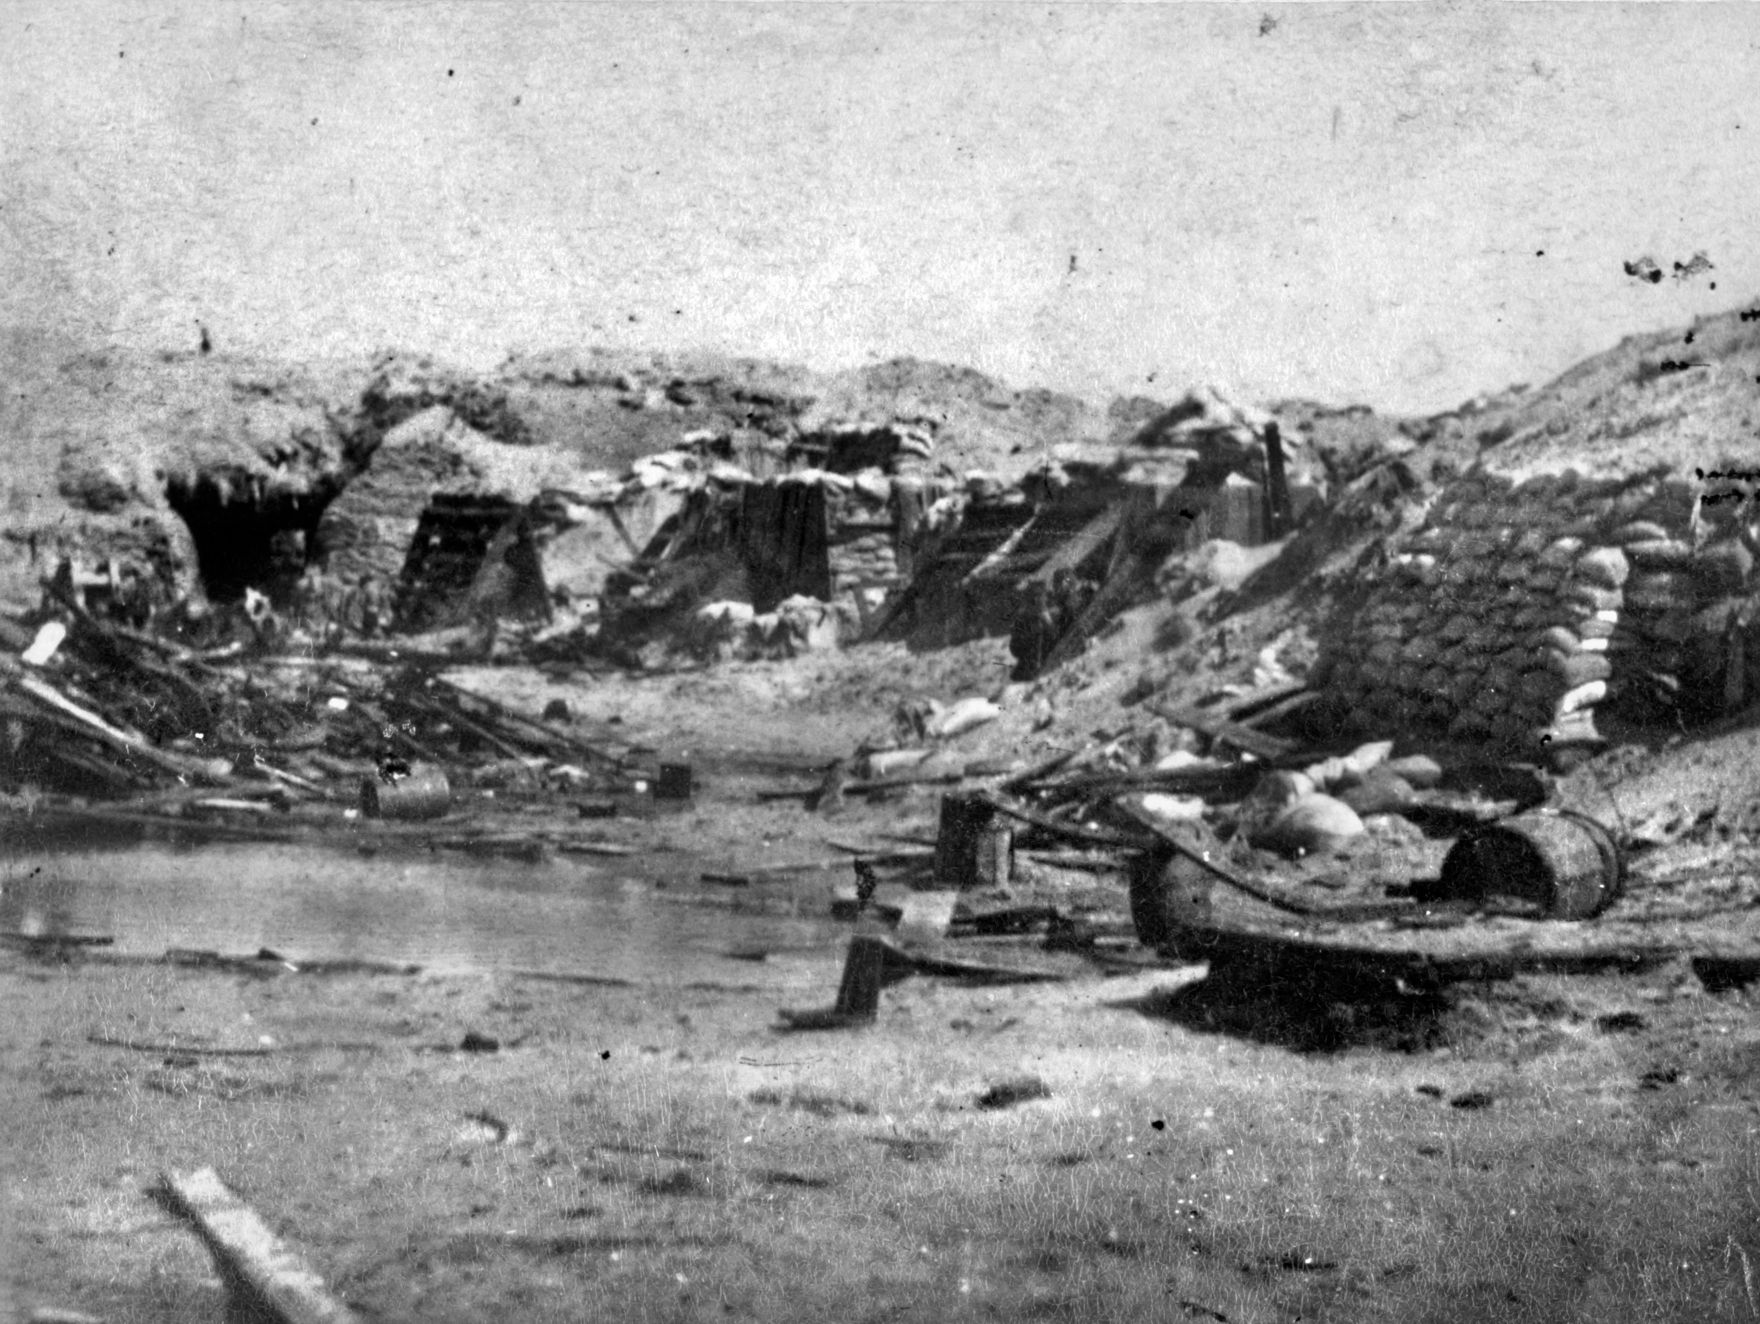 A period photograph shows the Confederate fortifications at Fort Wagner. The Confederates ultimately abandoned the fort in September 1863 after continued pressure from Union forces.